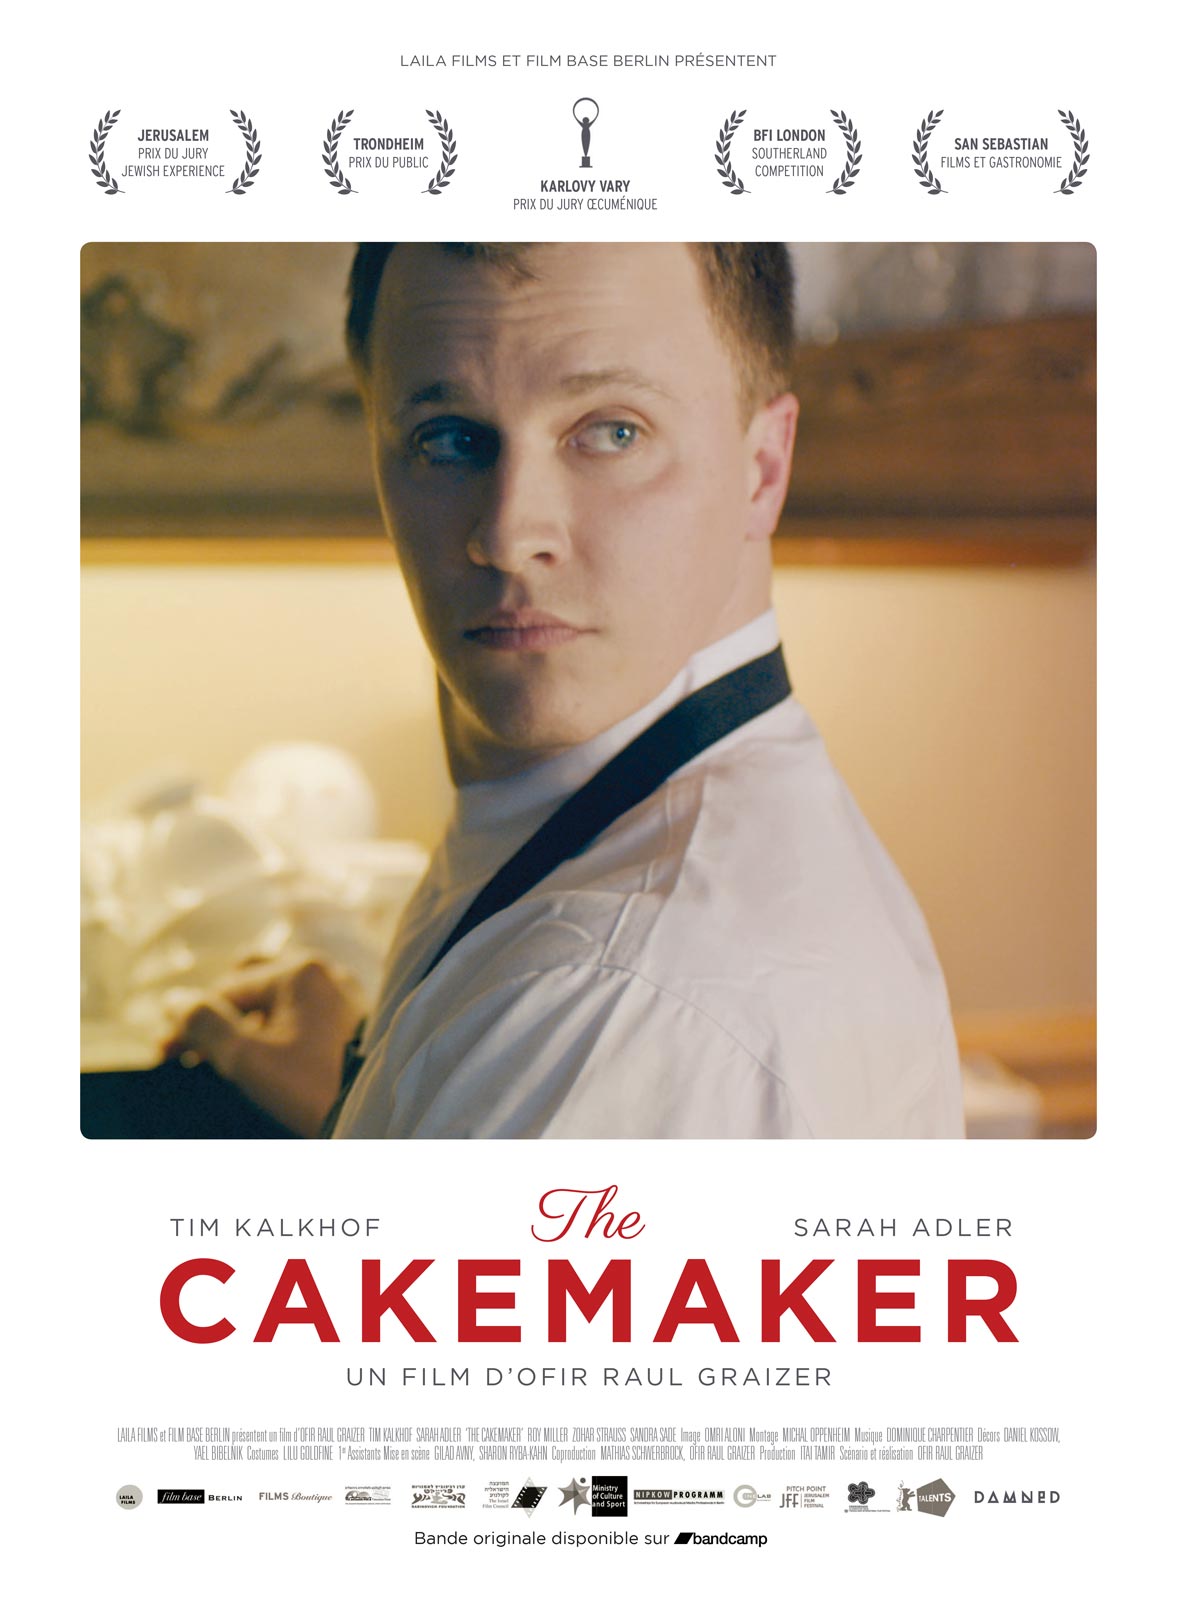 The Cakemaker (2017) Poster #5